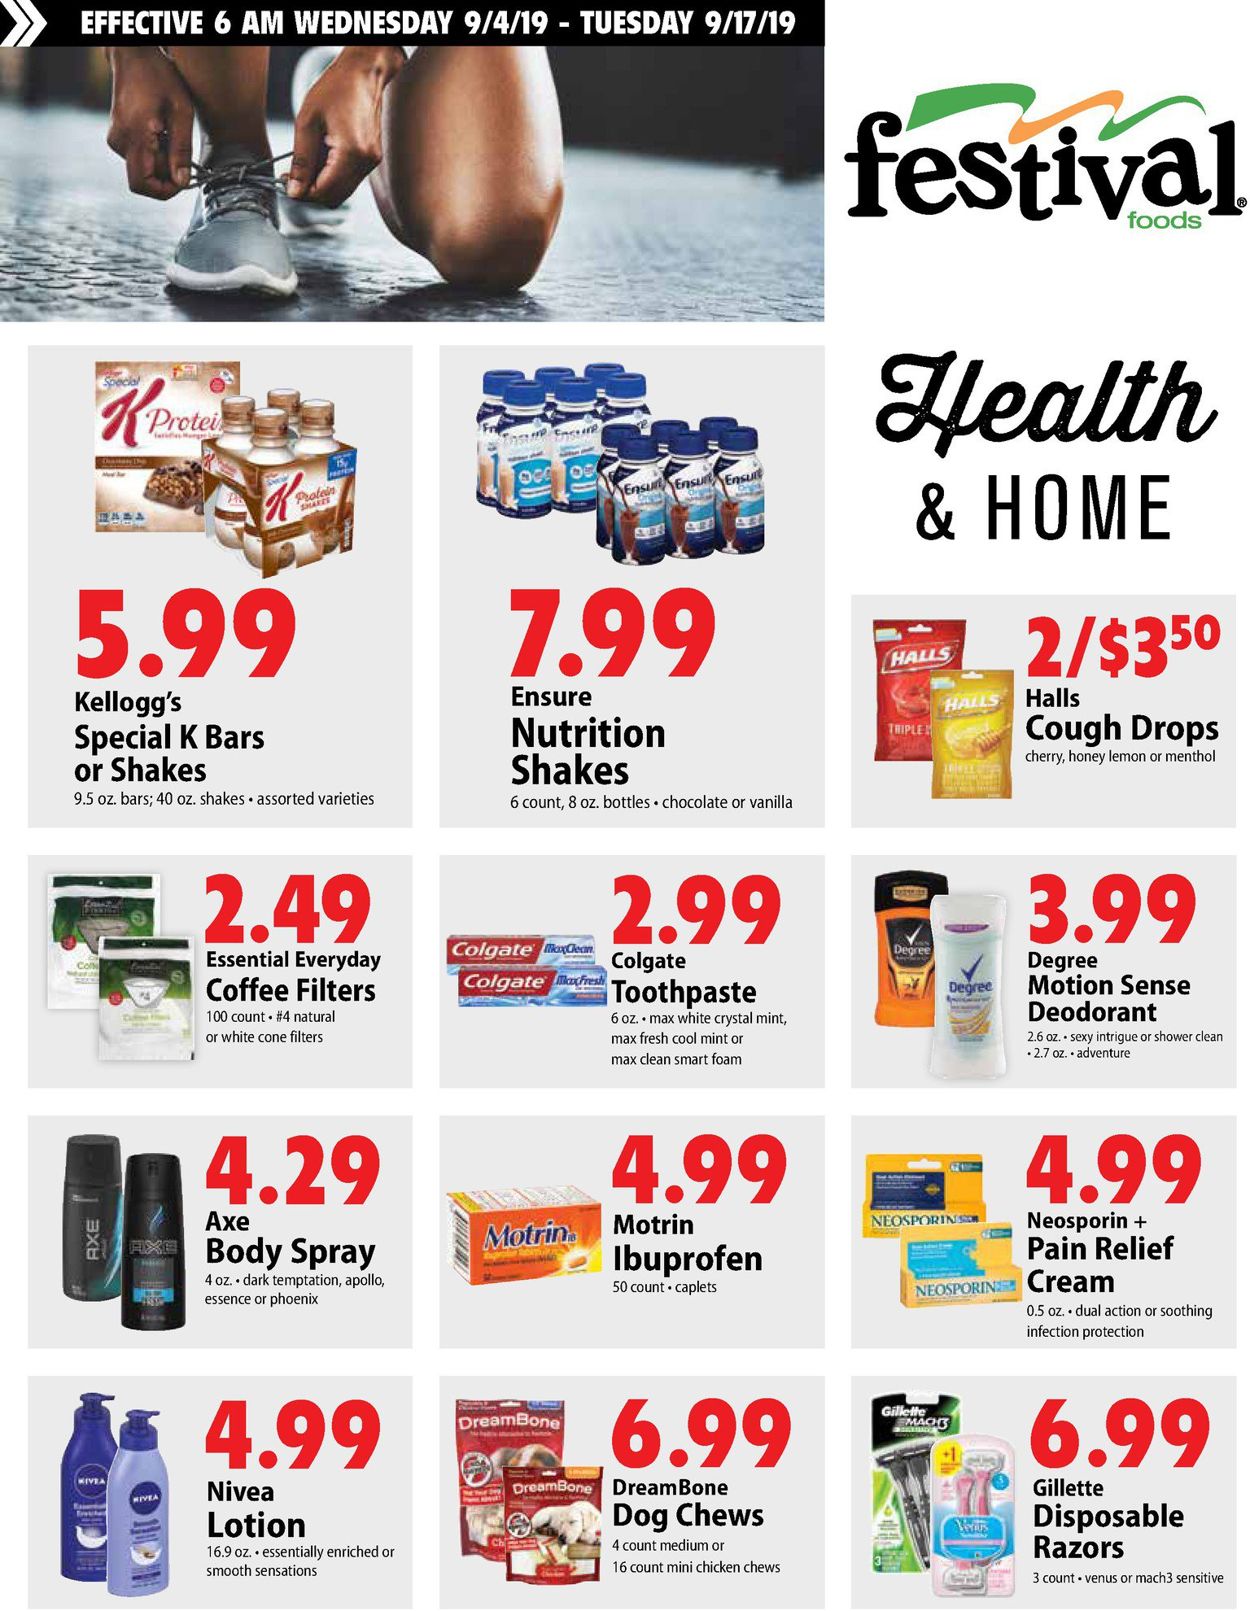 Festival Foods Current weekly ad 09/04 09/10/2019 [16]